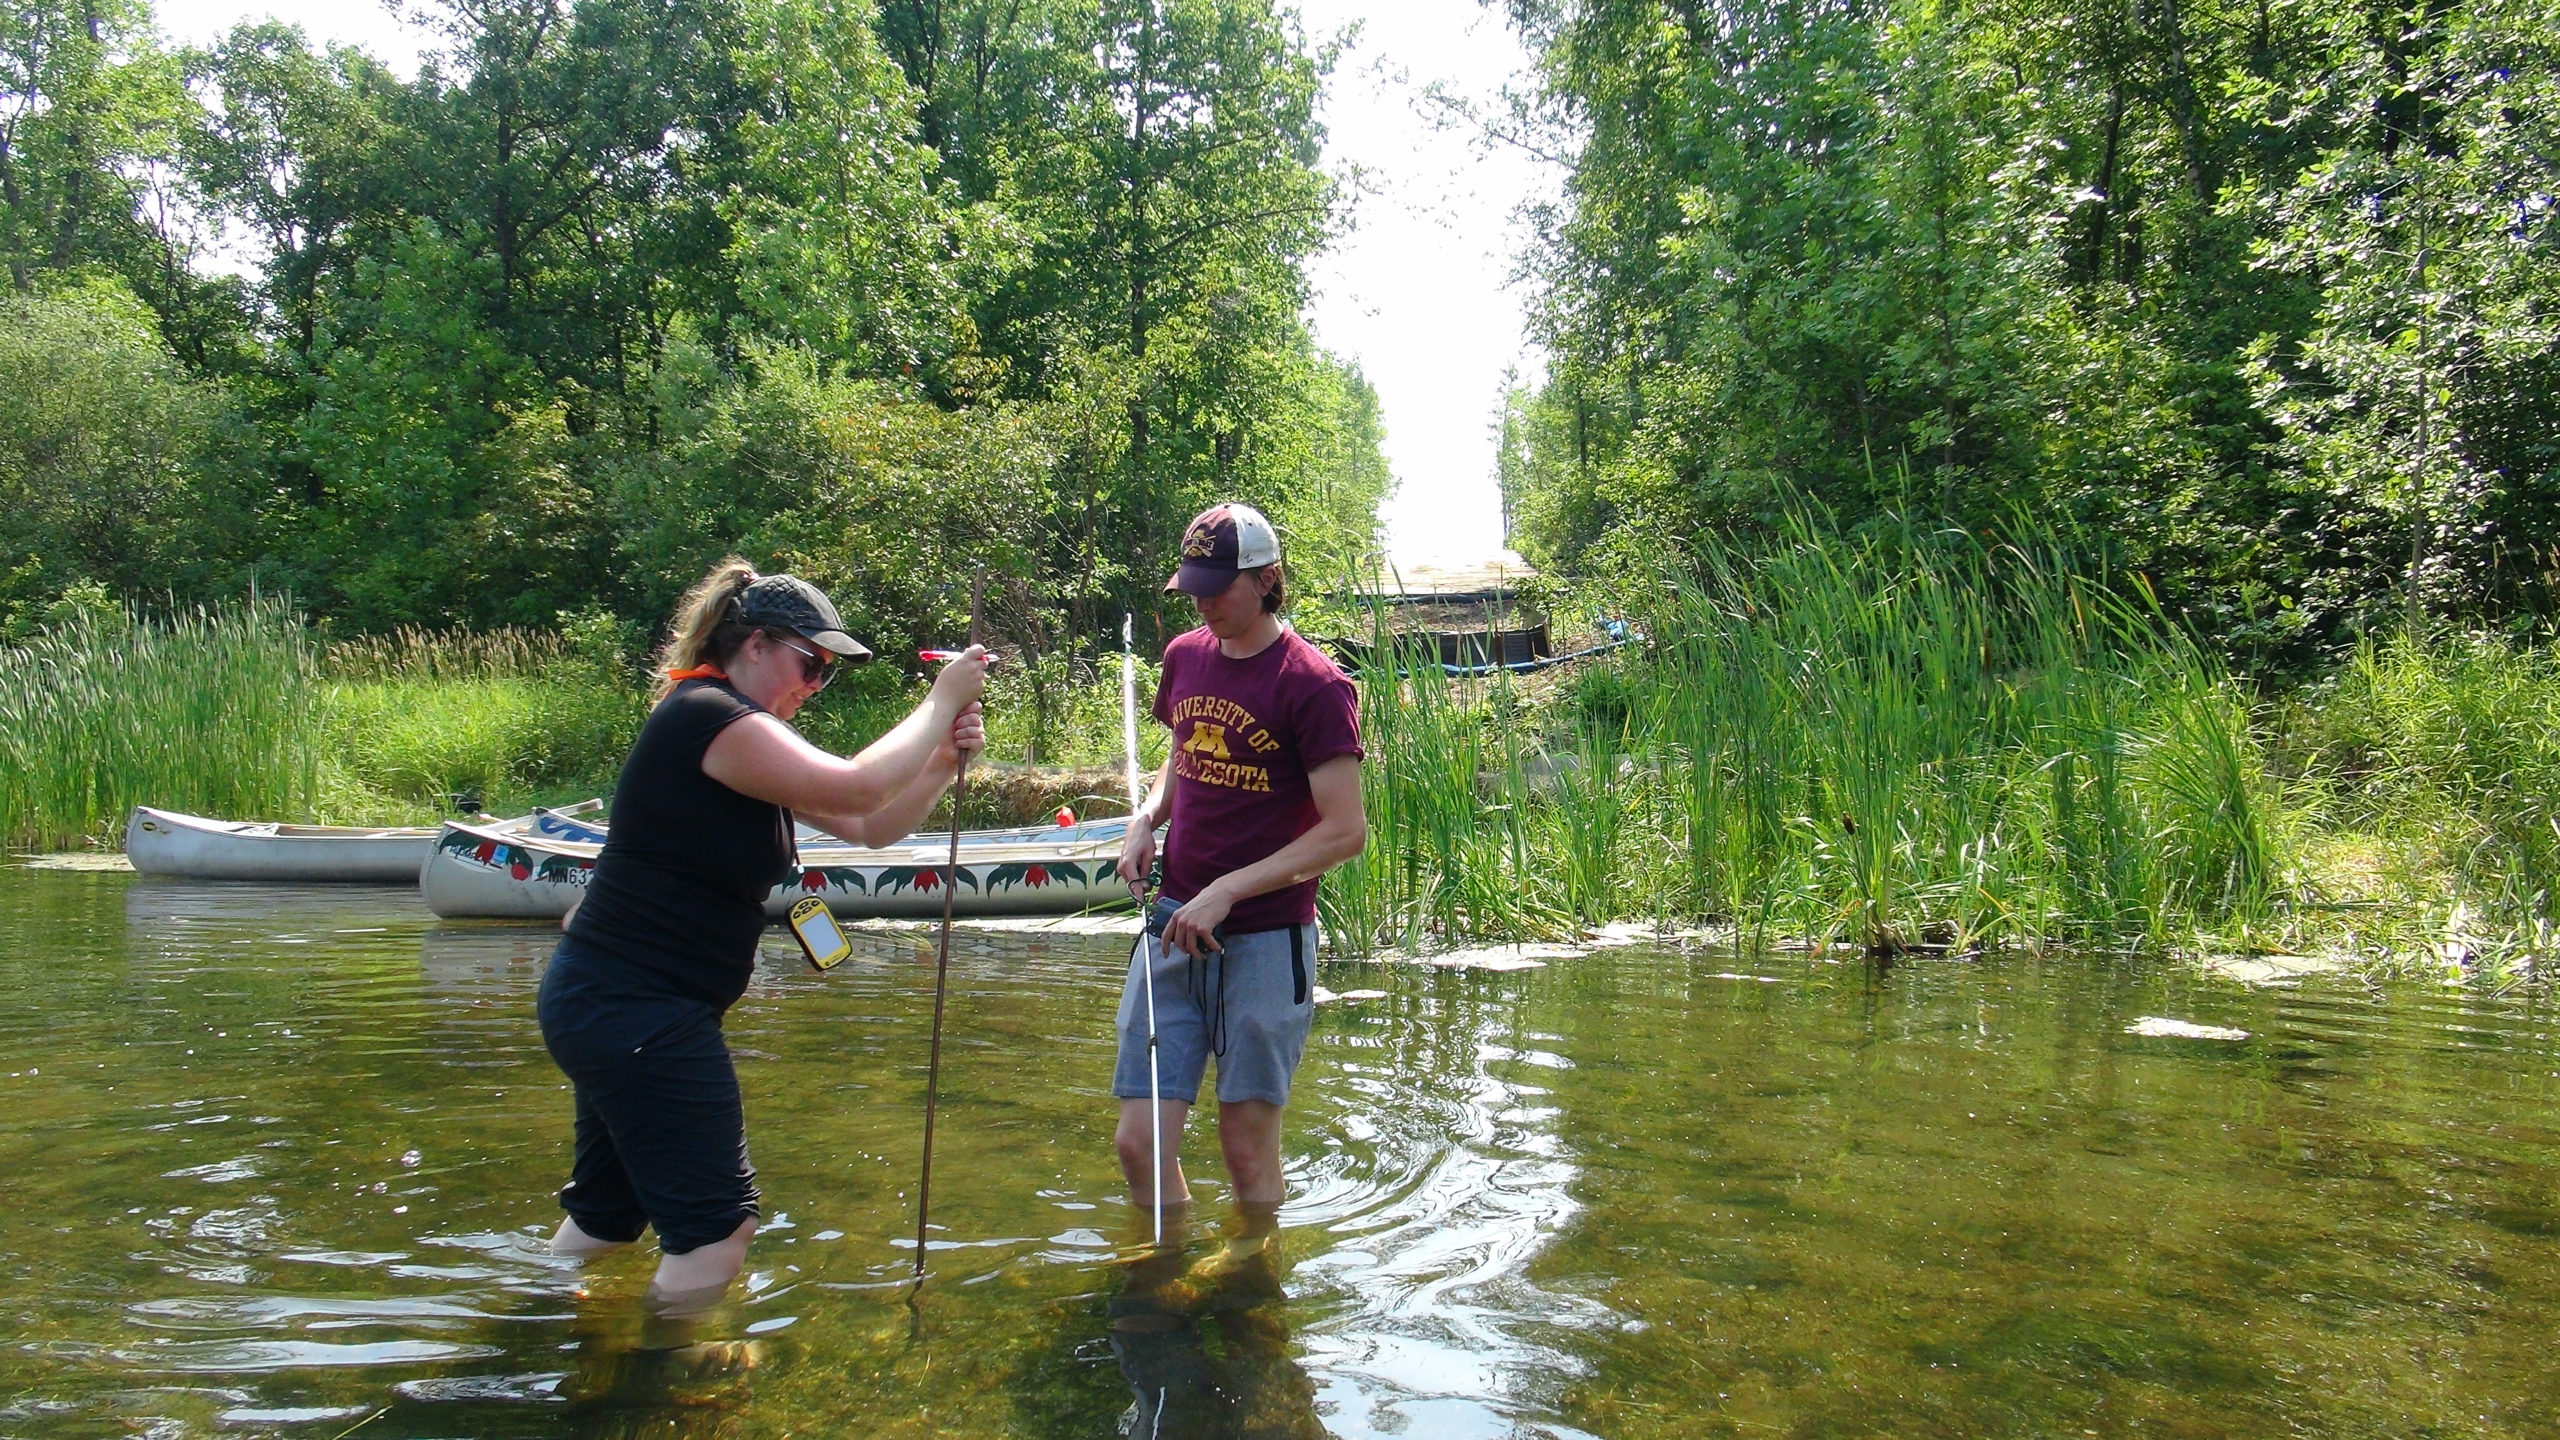 University of Minnesota students testing water temperatures in the river above the location where Enbridge installed Line 3.